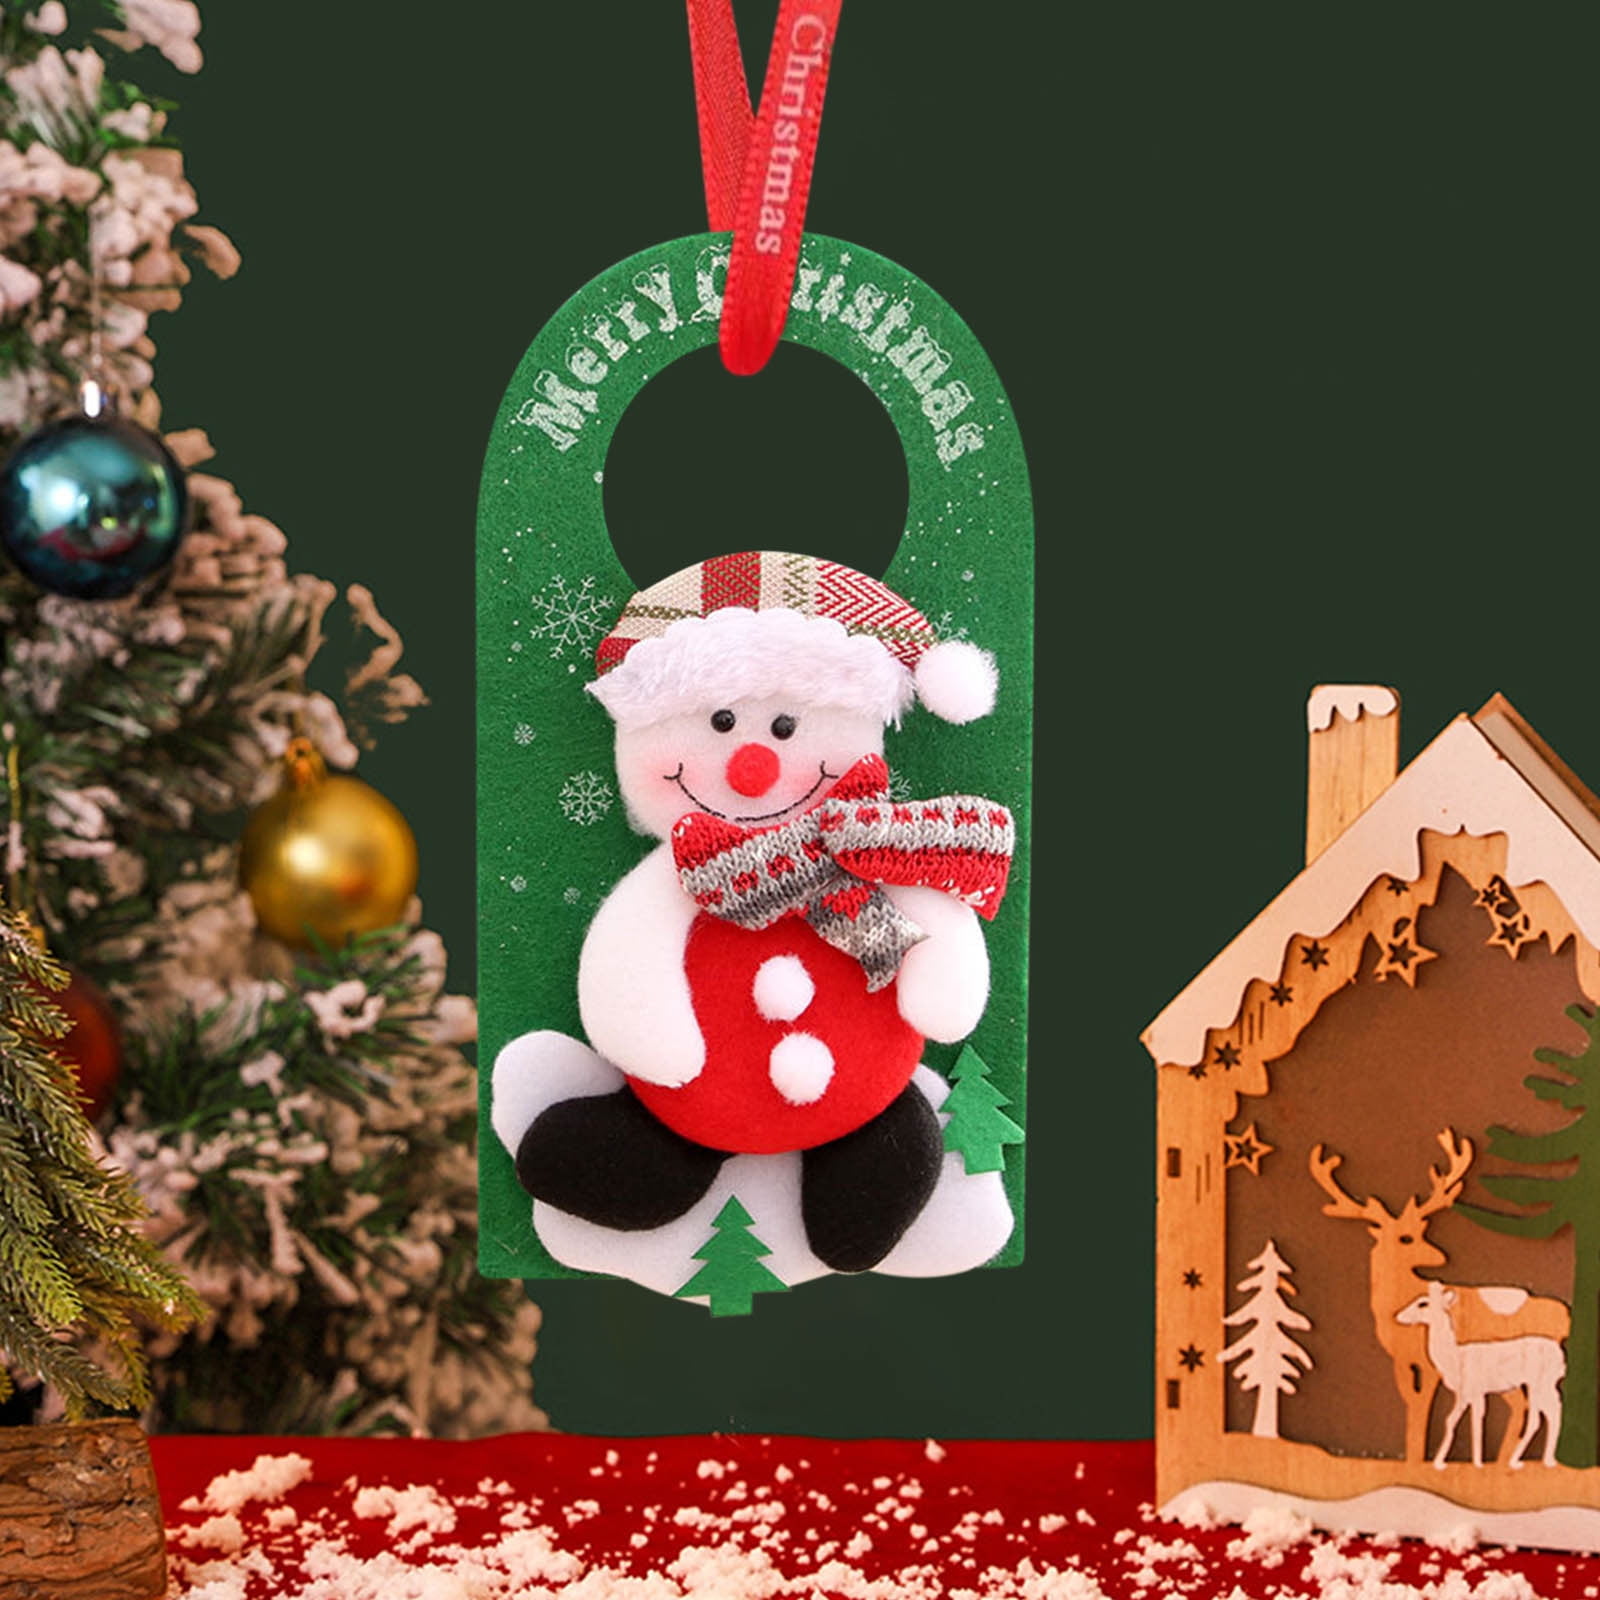 Rbckvxz Christmas Decorations Under Clearance, Christmas Door Hanger Decorations Cute Holiday Decorations Indoor Door Knob Merry Christmas